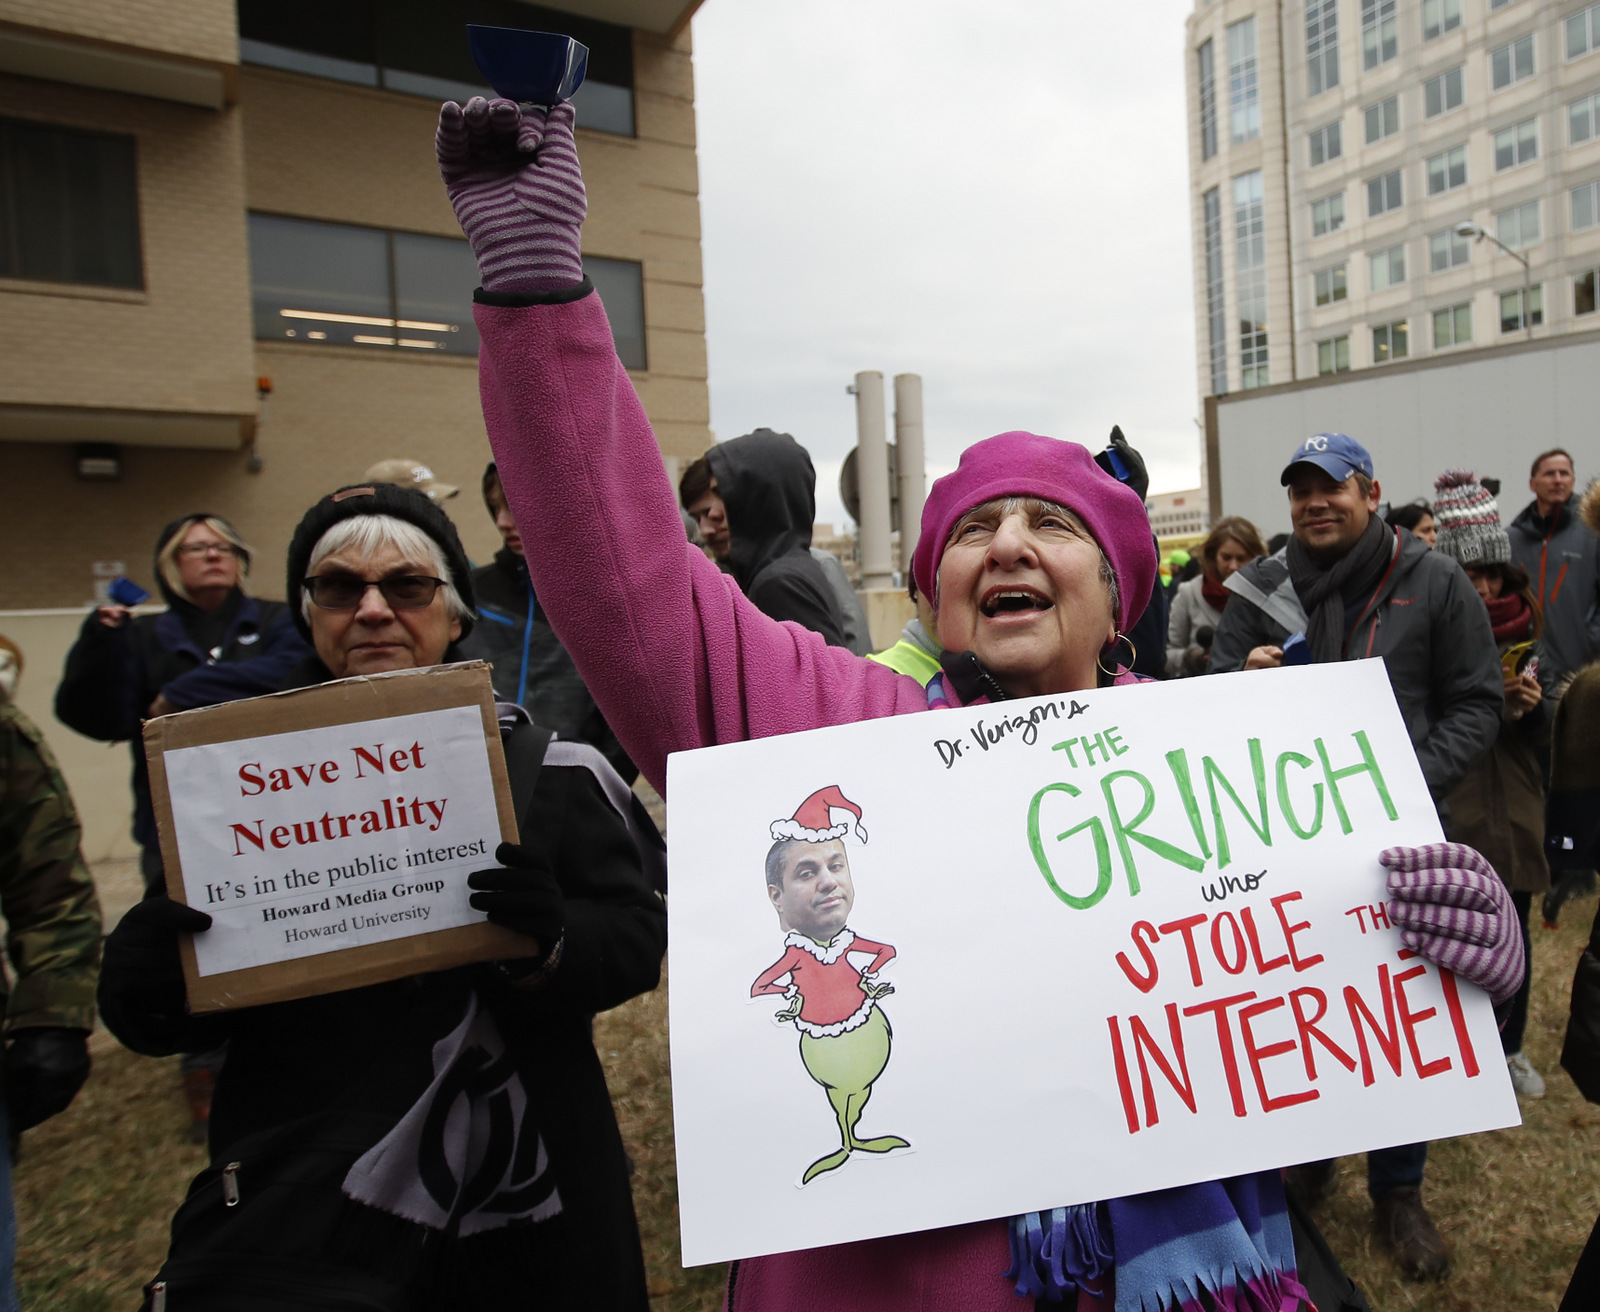 Diane Tepfer holds a sign with an image of Federal Communications Commission (FCC) Chairman Ajit Pai as the "Grinch who Stole the Internet" as she protests near the FCC, in Washington, Dec. 14, 2017. (AP/Carolyn Kaster)